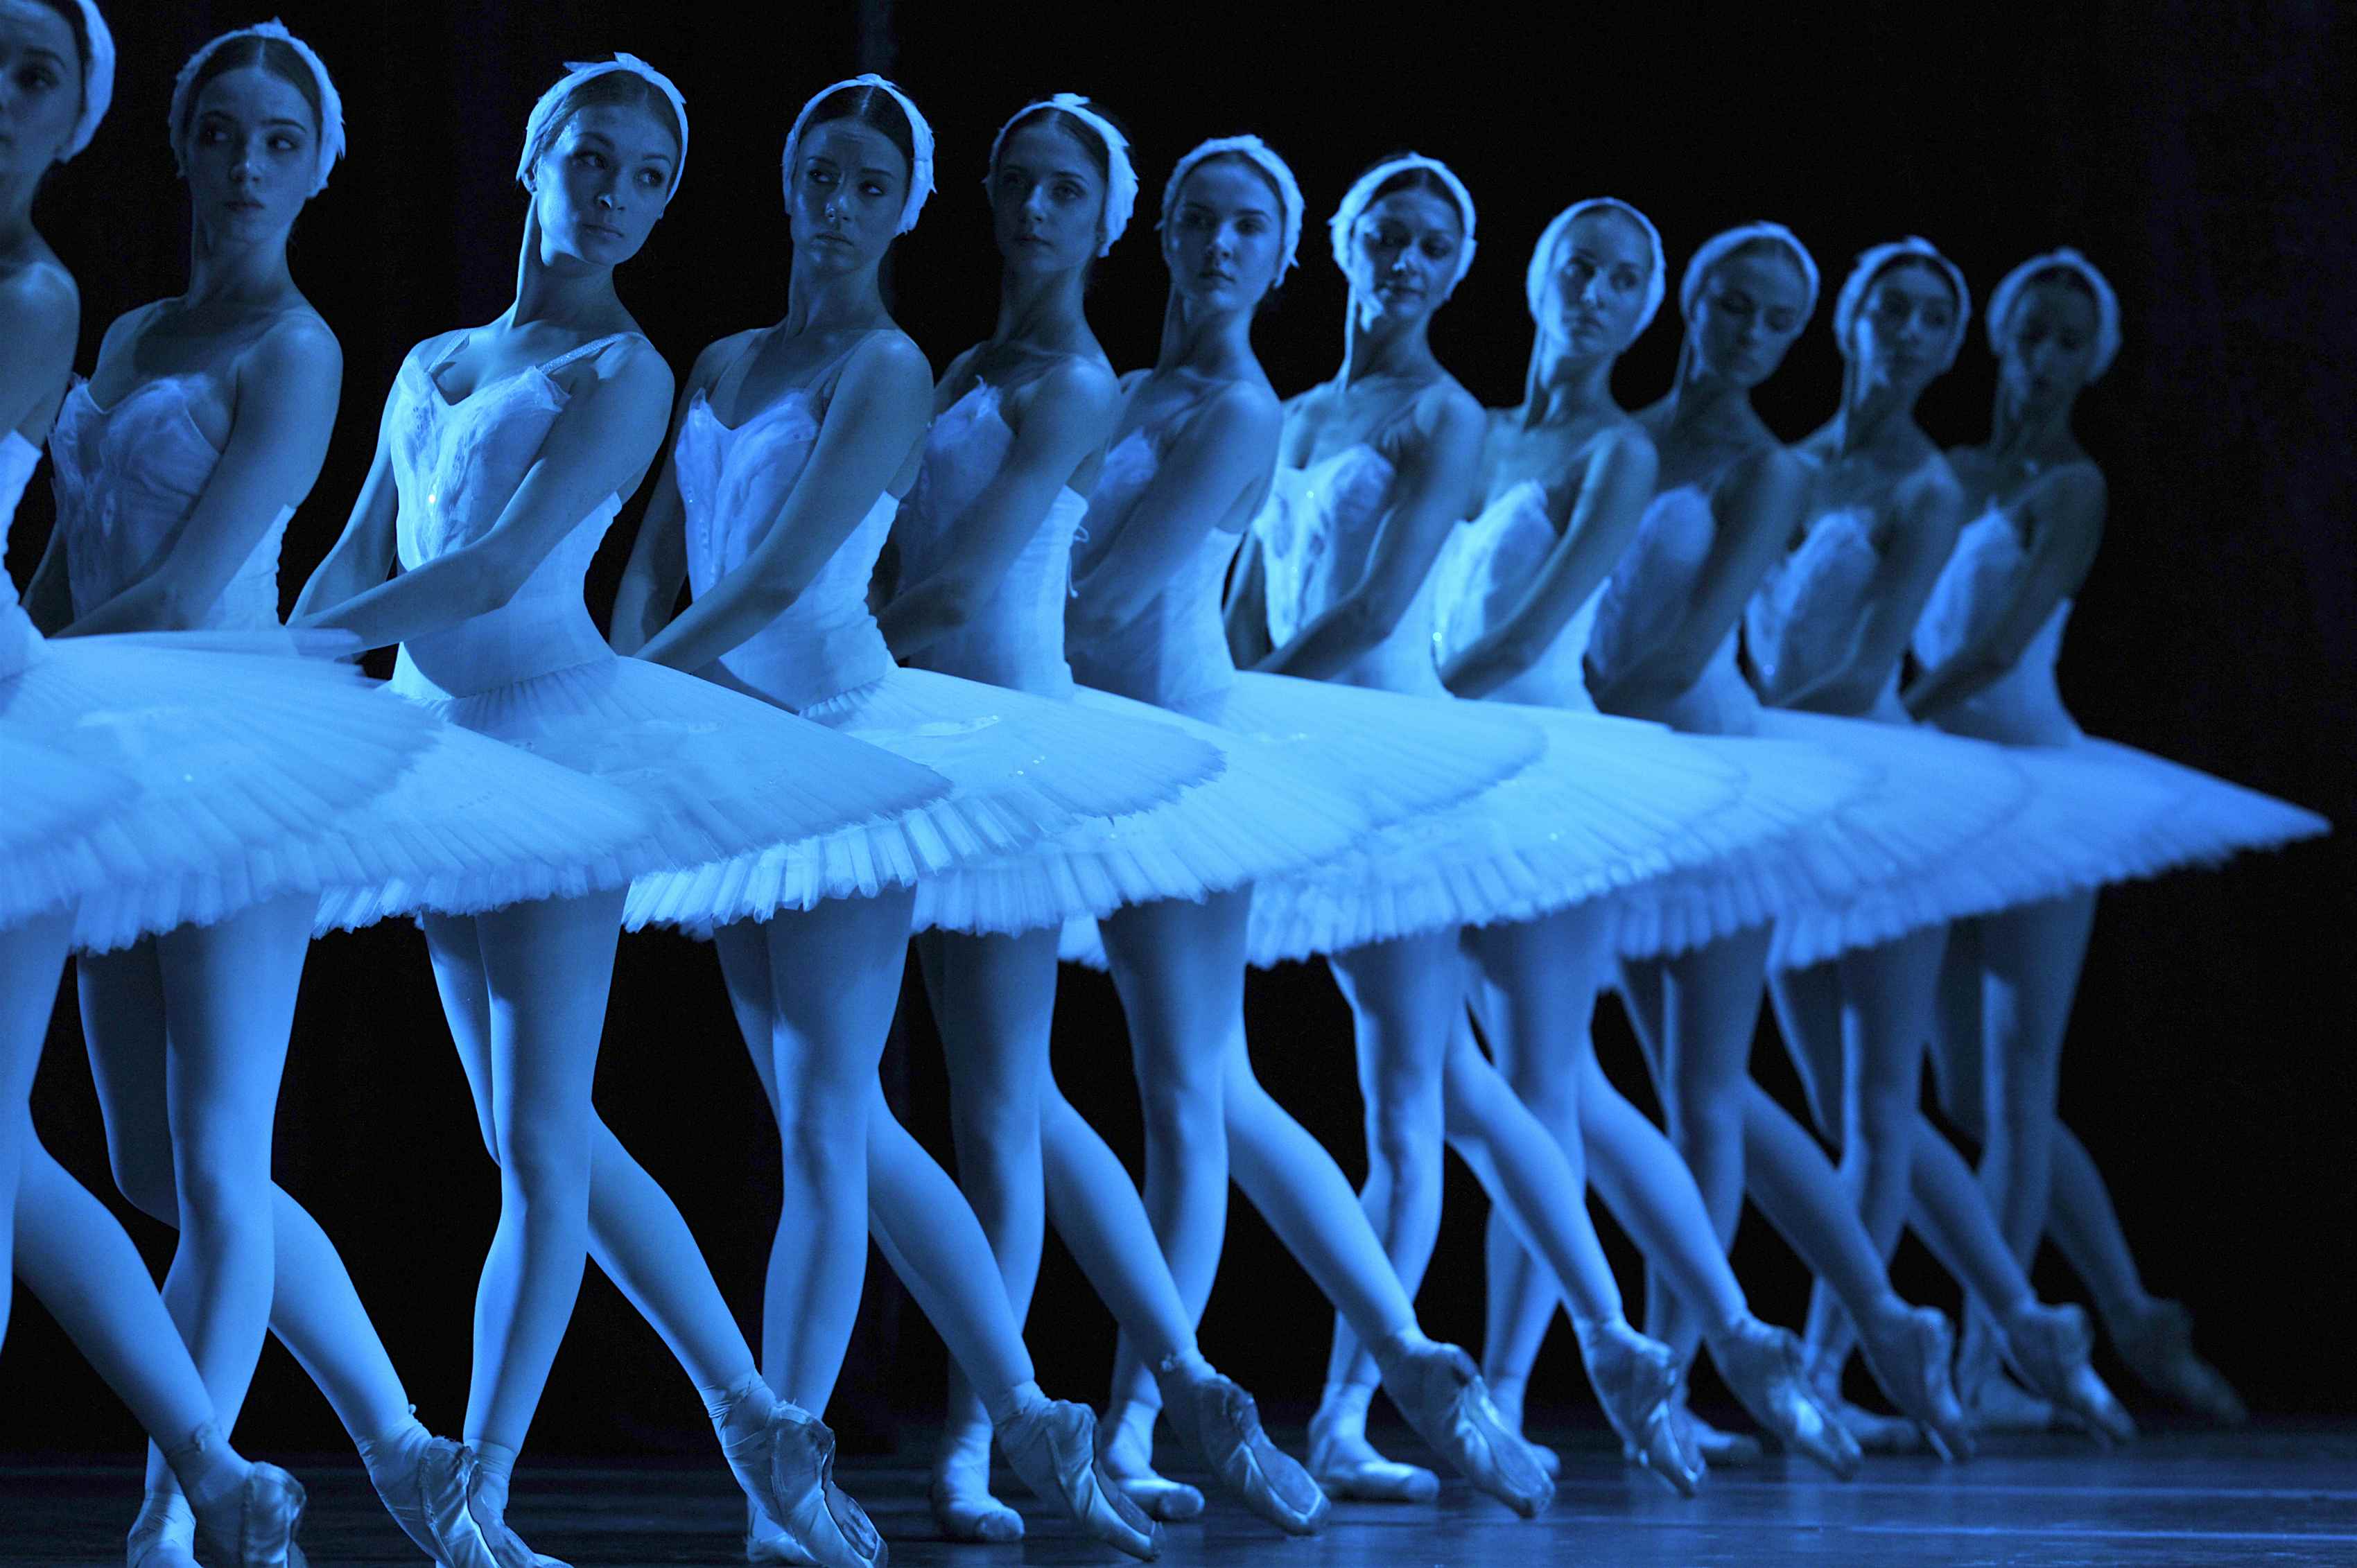 For the first time ever, the Bolshoi will livestream its ballets